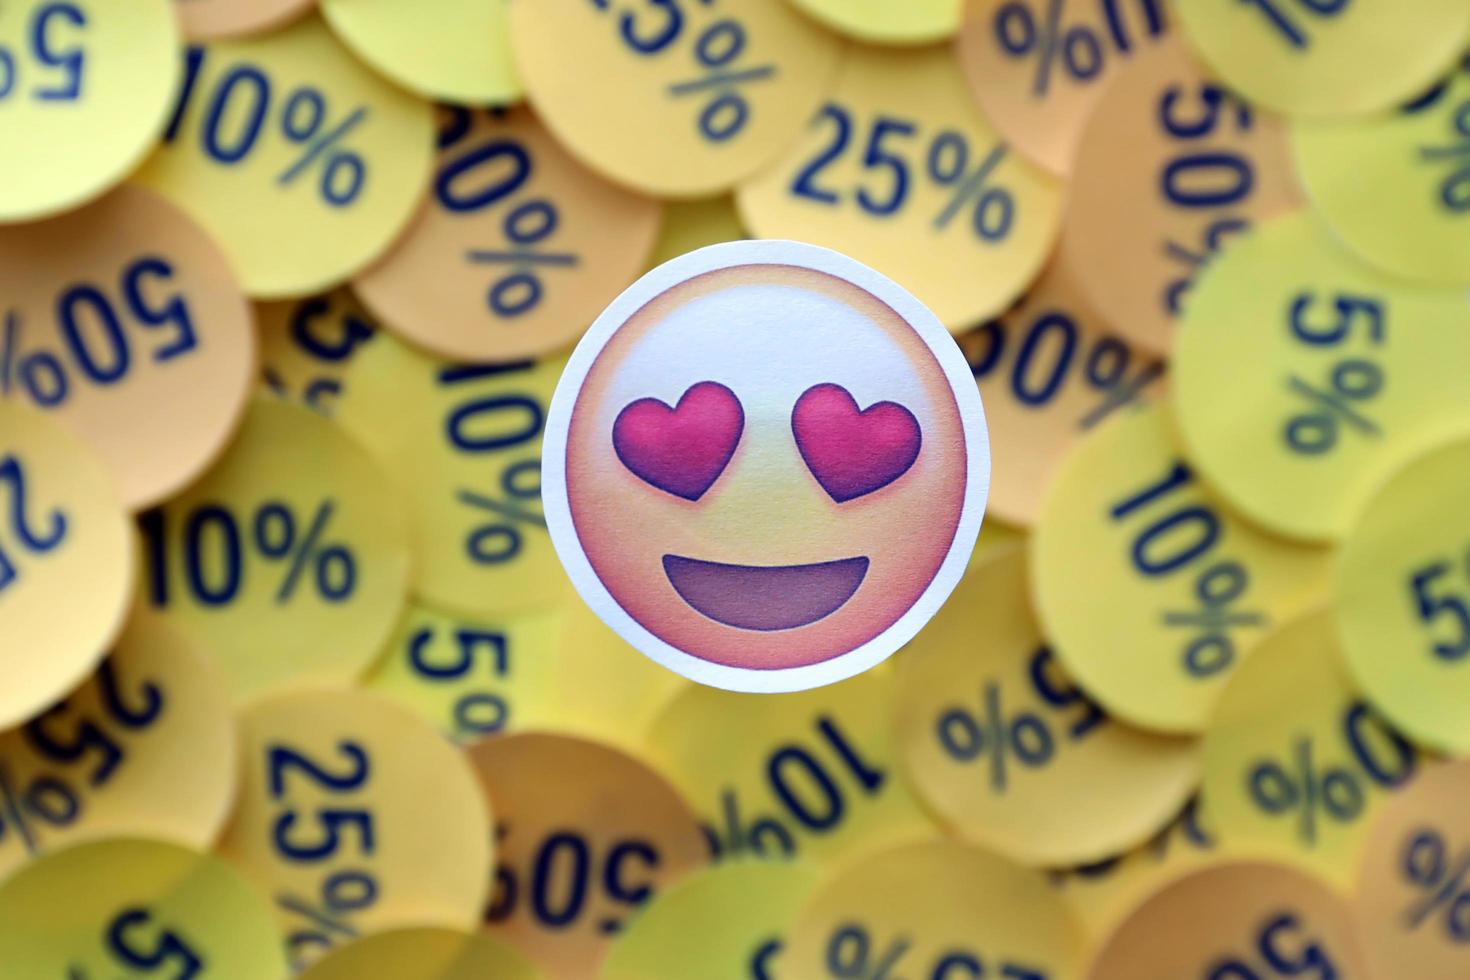 Ternopil, Ukraine - May 8, 2022 Love emoji sticker on large amount of yellow stickers with percentage values for black friday or cyber monday photo